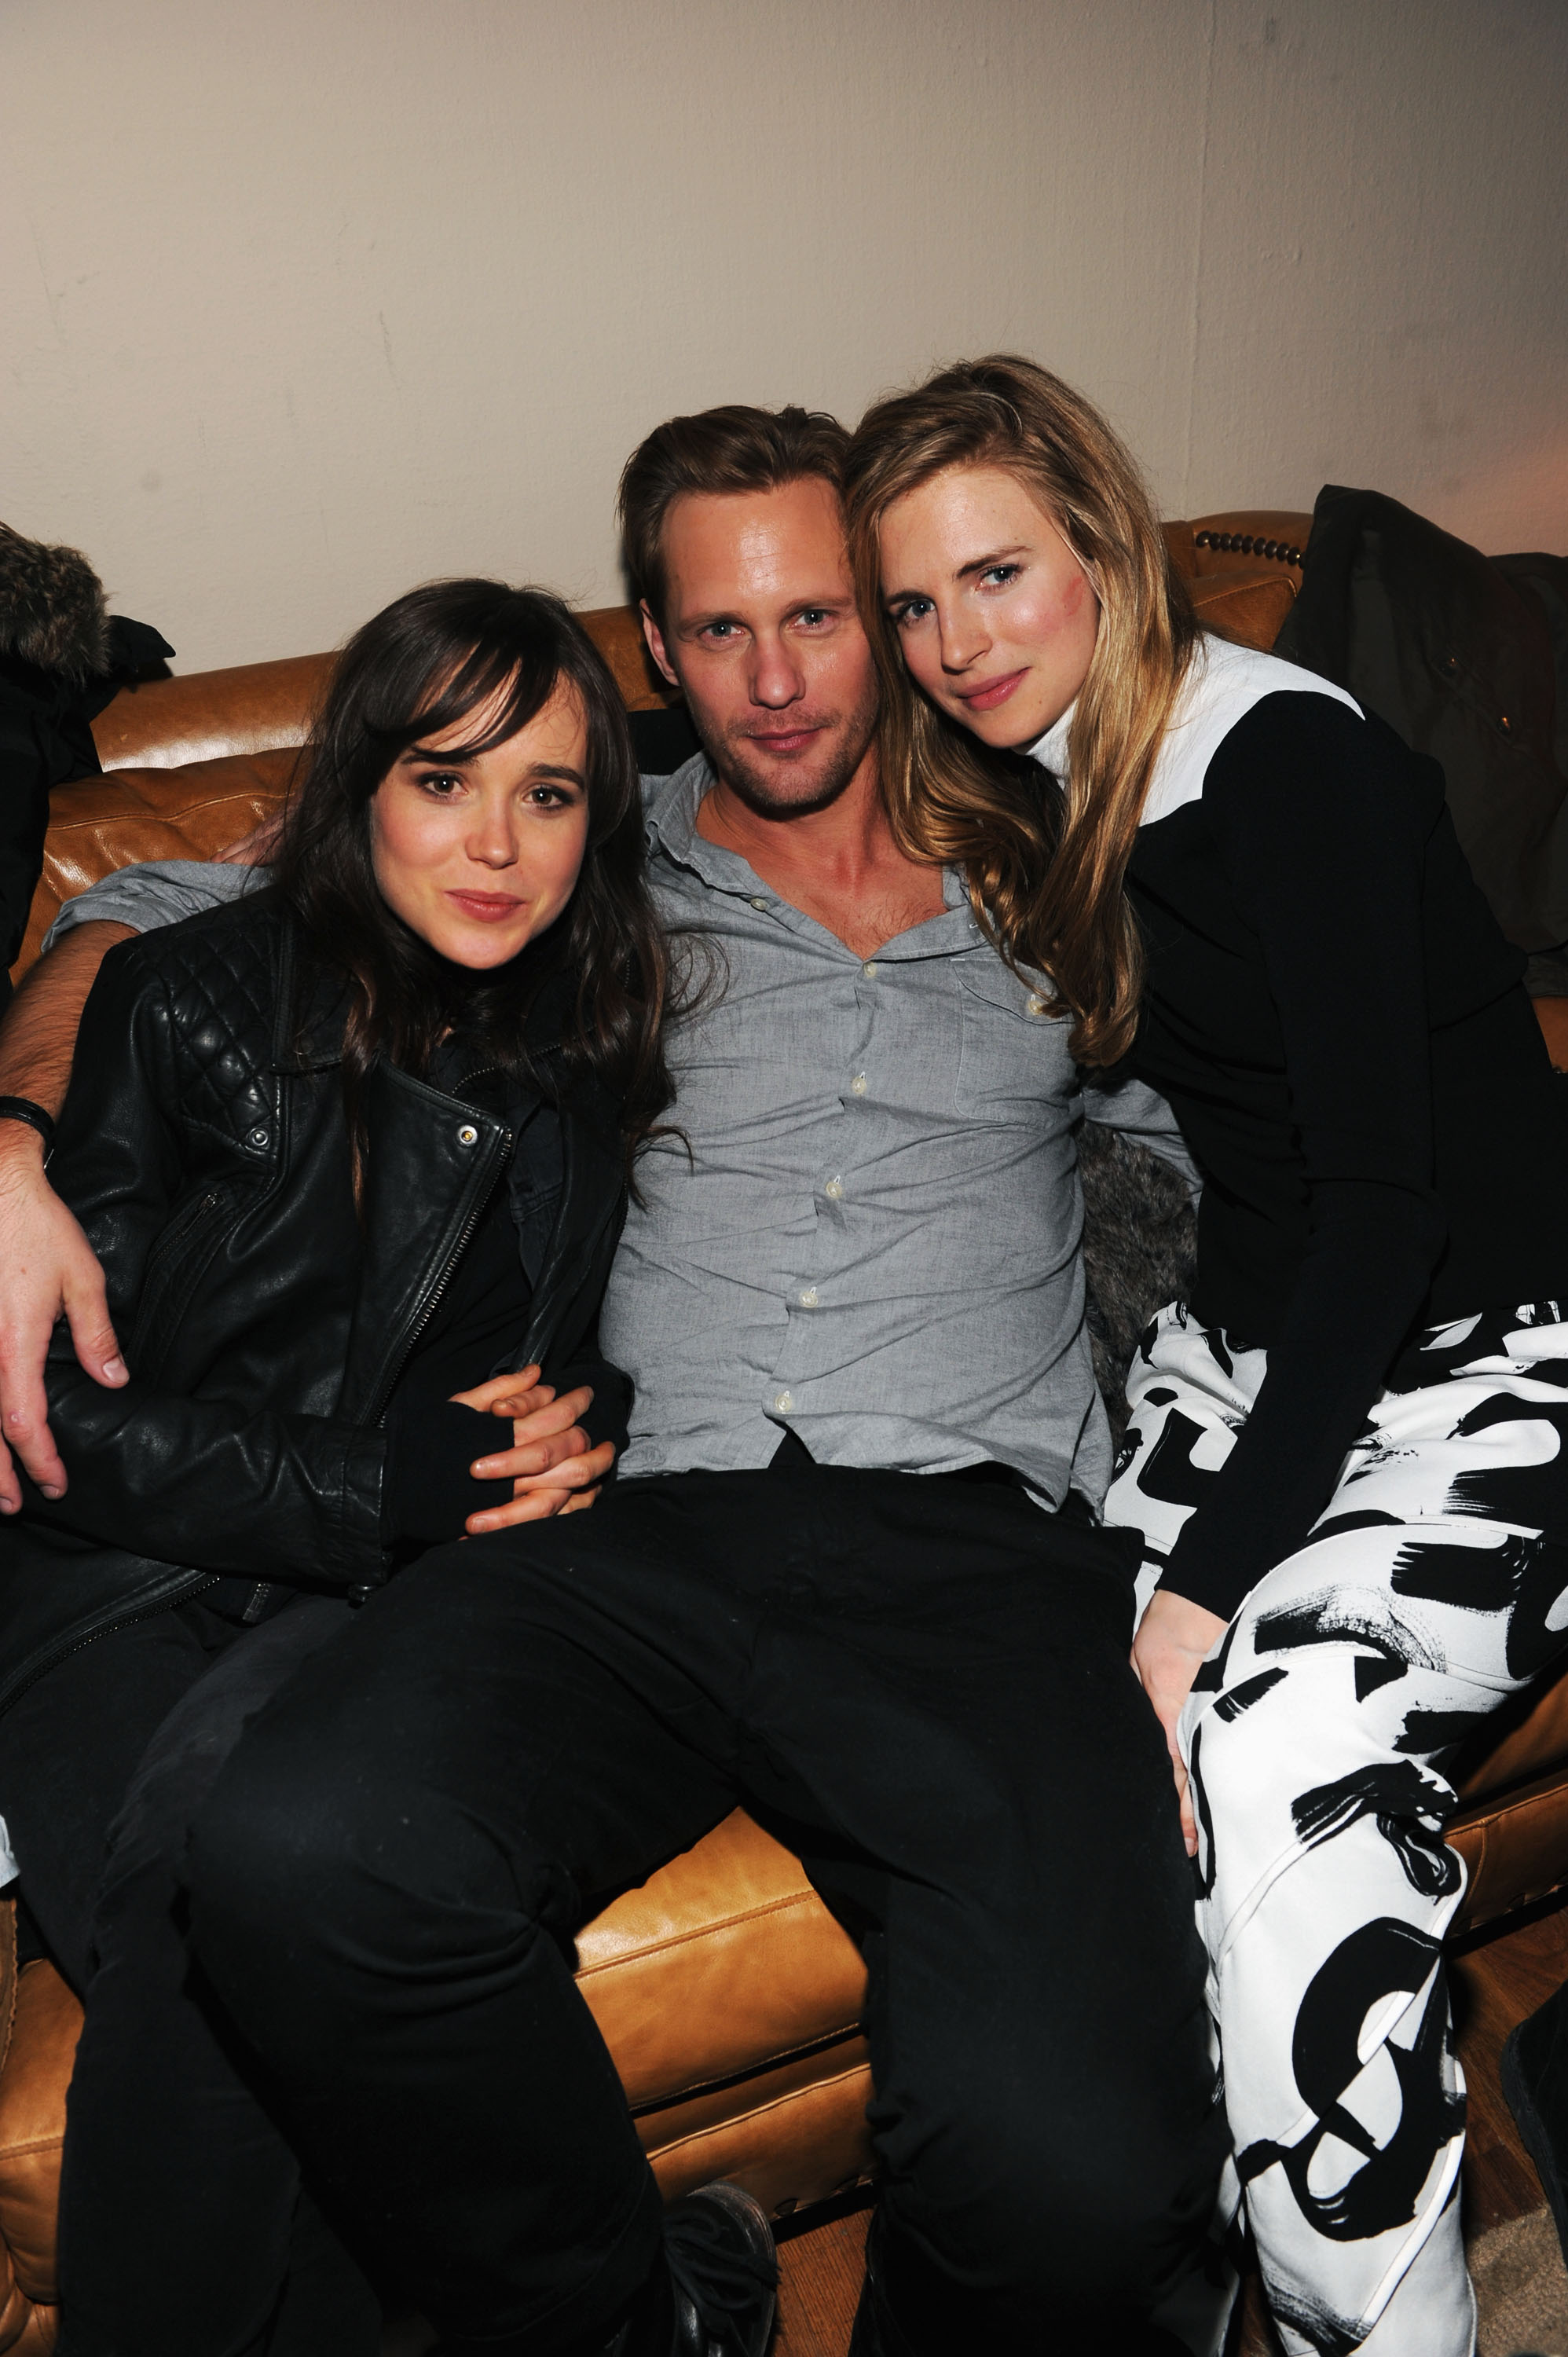 PARK CITY, UT - JANUARY 20:  (L-R) Actors Ellen Page, Alexander Skarsgard and Brit Marling attend Grey Goose Blue Door party for Fox Searchlight Pictures "Stoker" and "The East" on January 20, 2013 in Park City, Utah.  (Photo by Jamie McCarthy/Getty Images for Grey Goose)